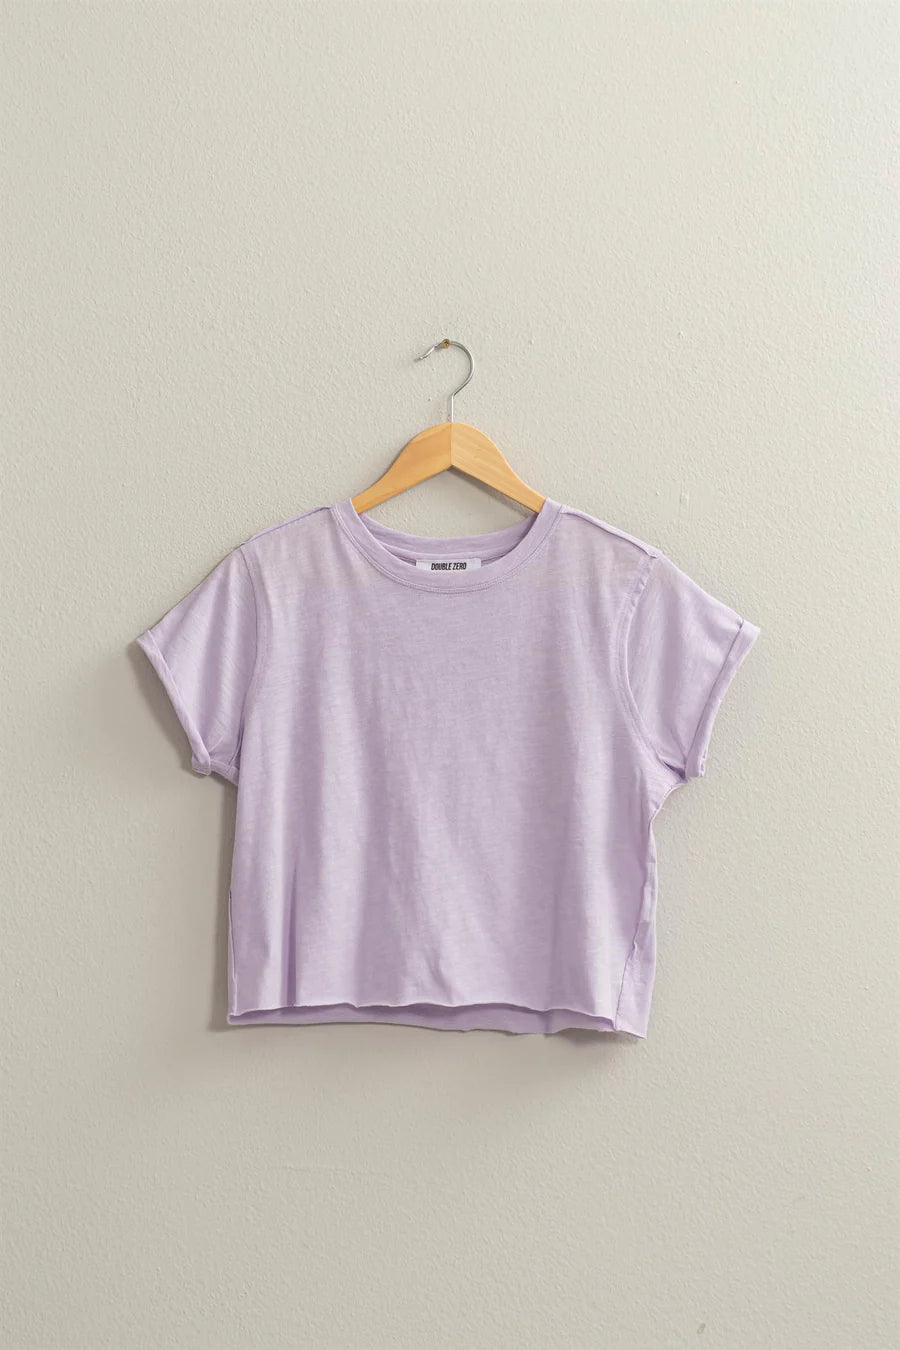 laura cropped tee